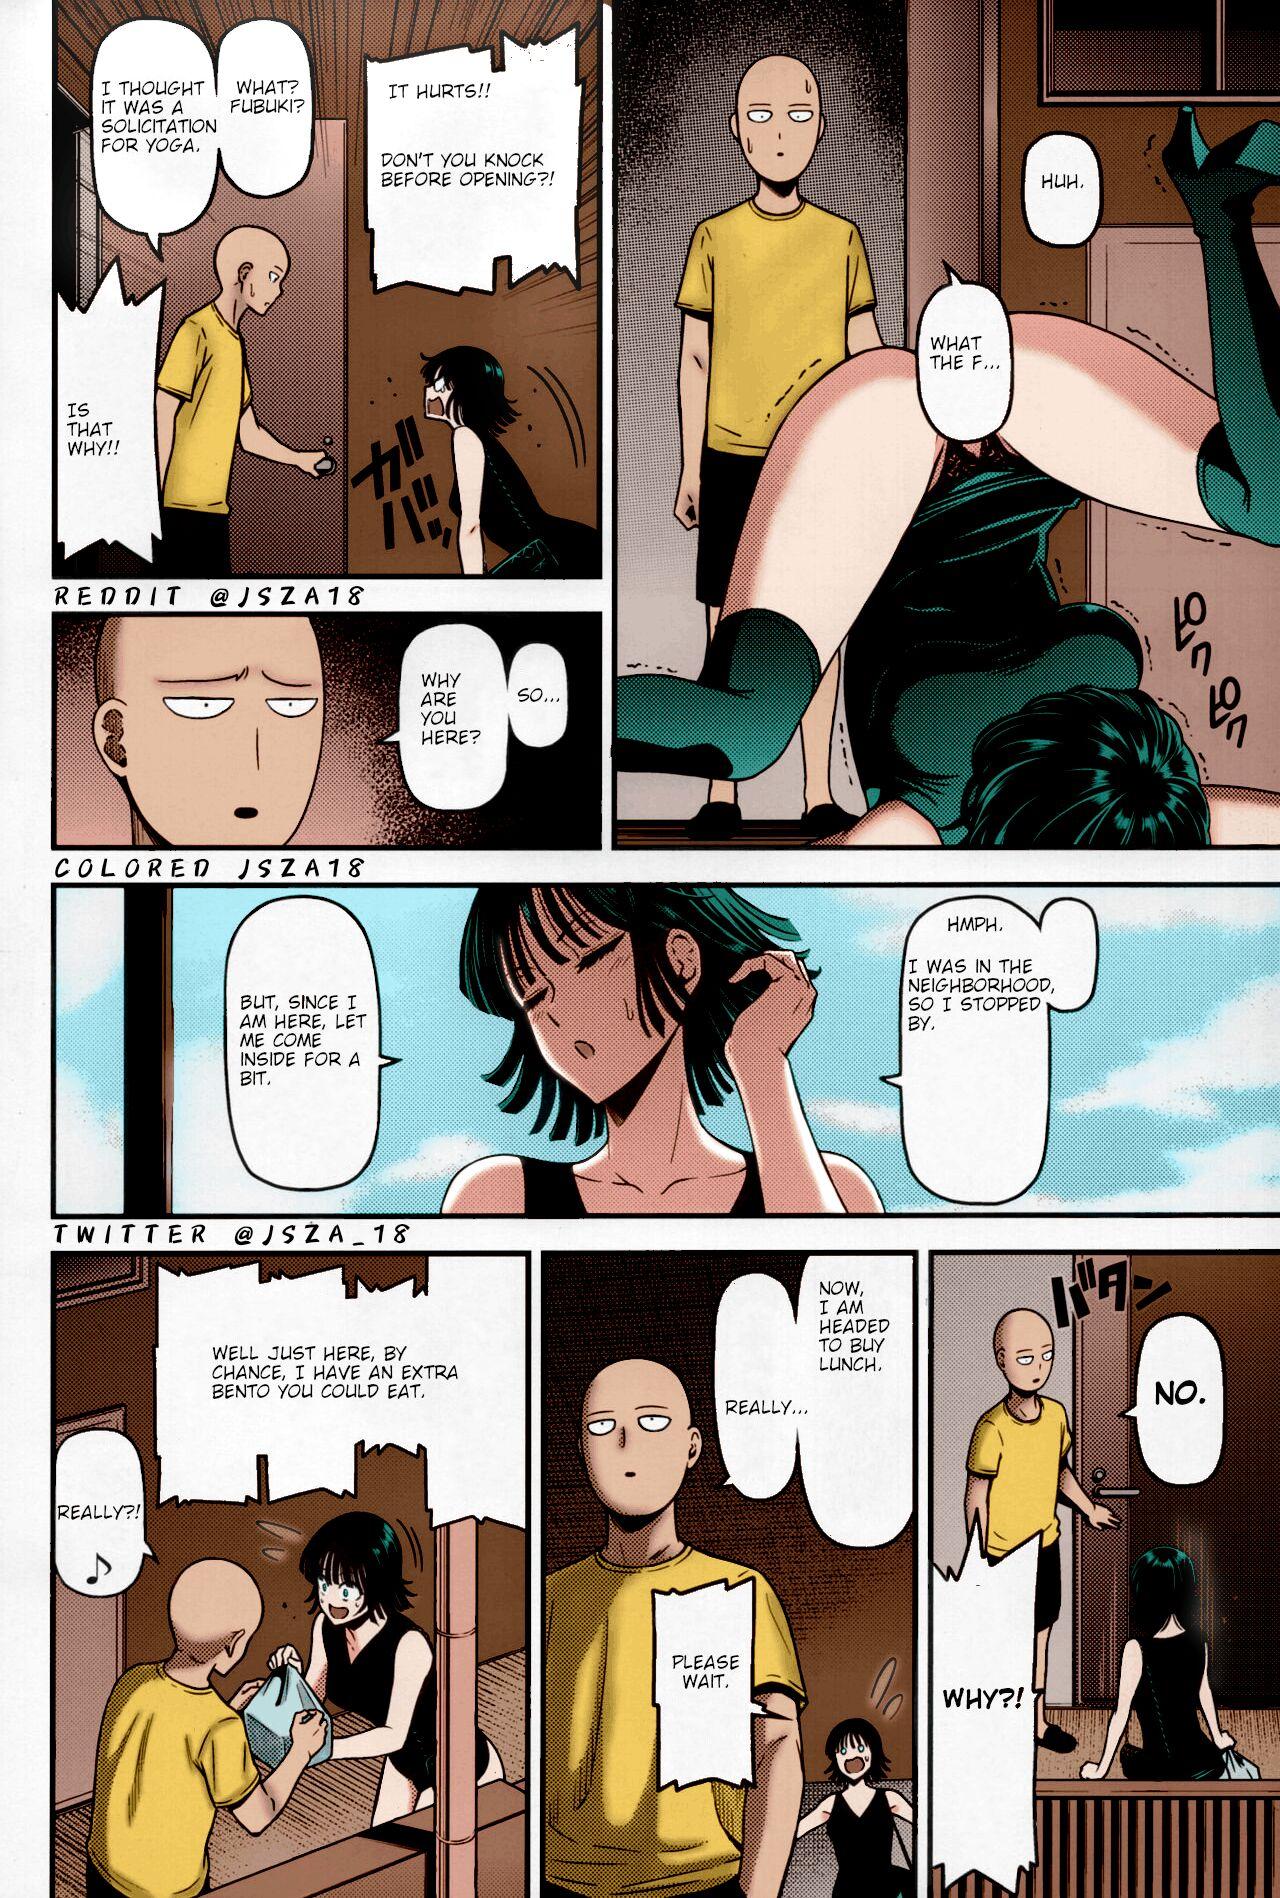 Moan ONE-HURRICANE 6 - One punch man Couple Porn - Page 3